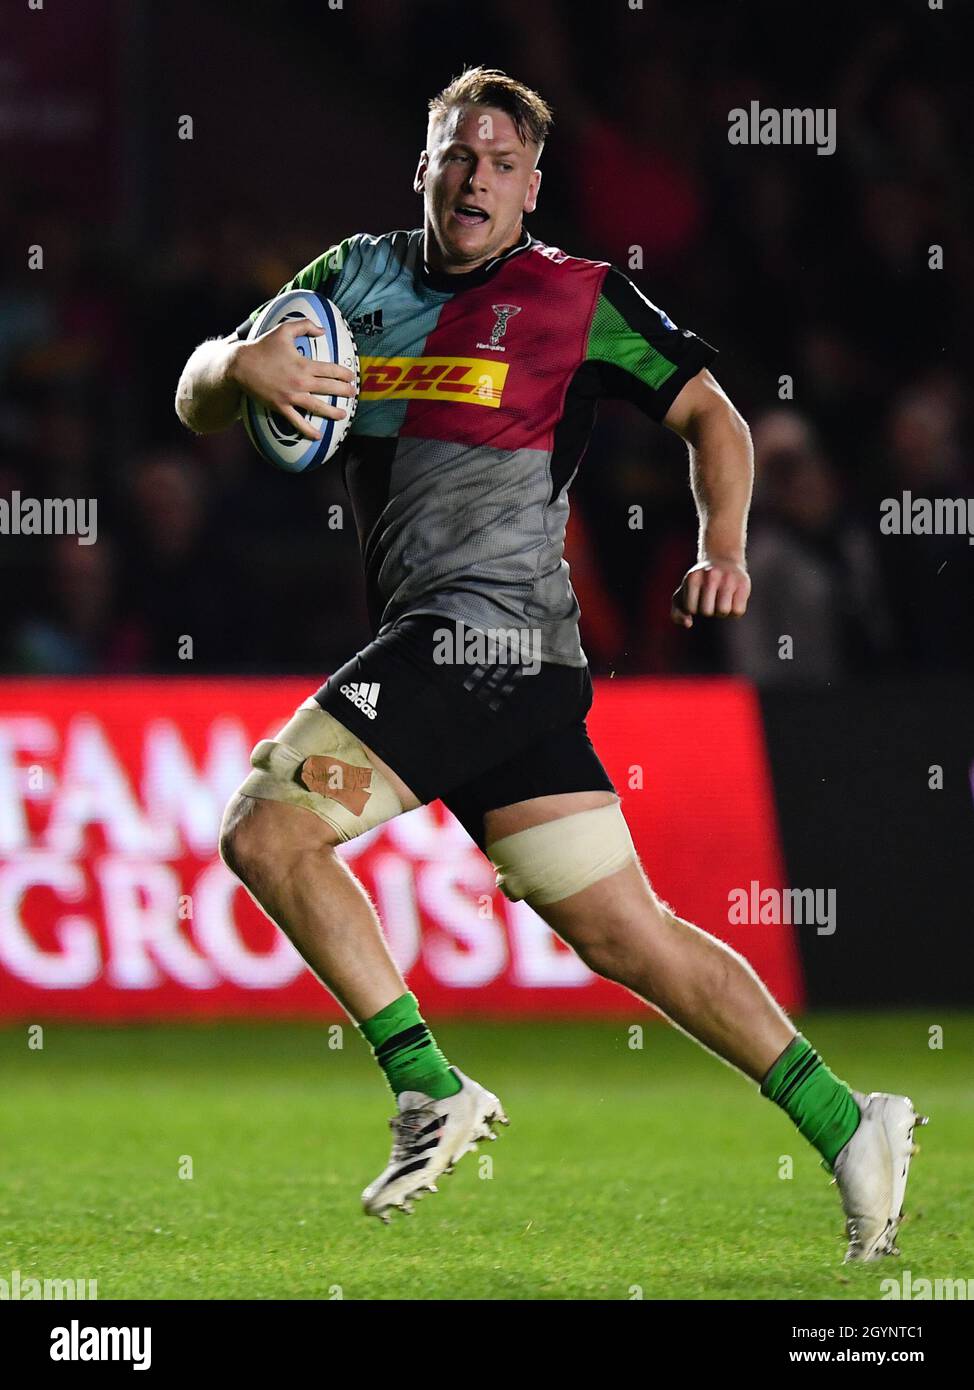 Twickenham Stoop Stadium, UK, UK. 8th October, 2021. Harlequins' Alex Dombrandt breaks away to score their 8th try during the Gallagher English Premiership game between Harlequins and Bristol Bears: Credit: Ashley Western/Alamy Live News Stock Photo